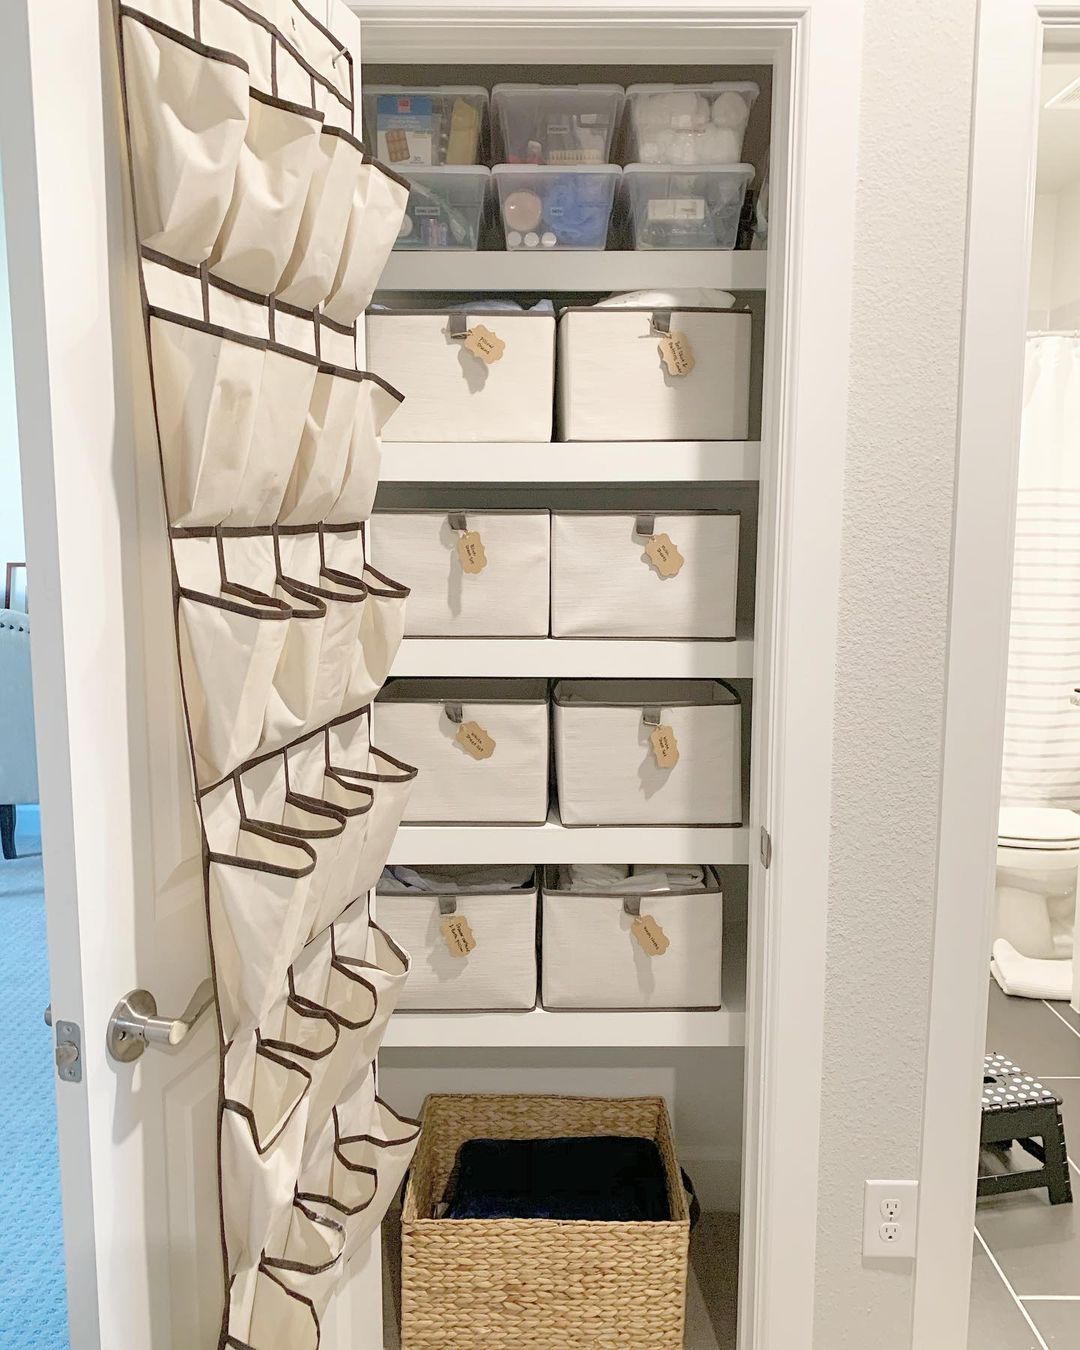 Neatly Organized Linen Closet with Bins for Everything. Photo by Instagram user @libbyandlabels